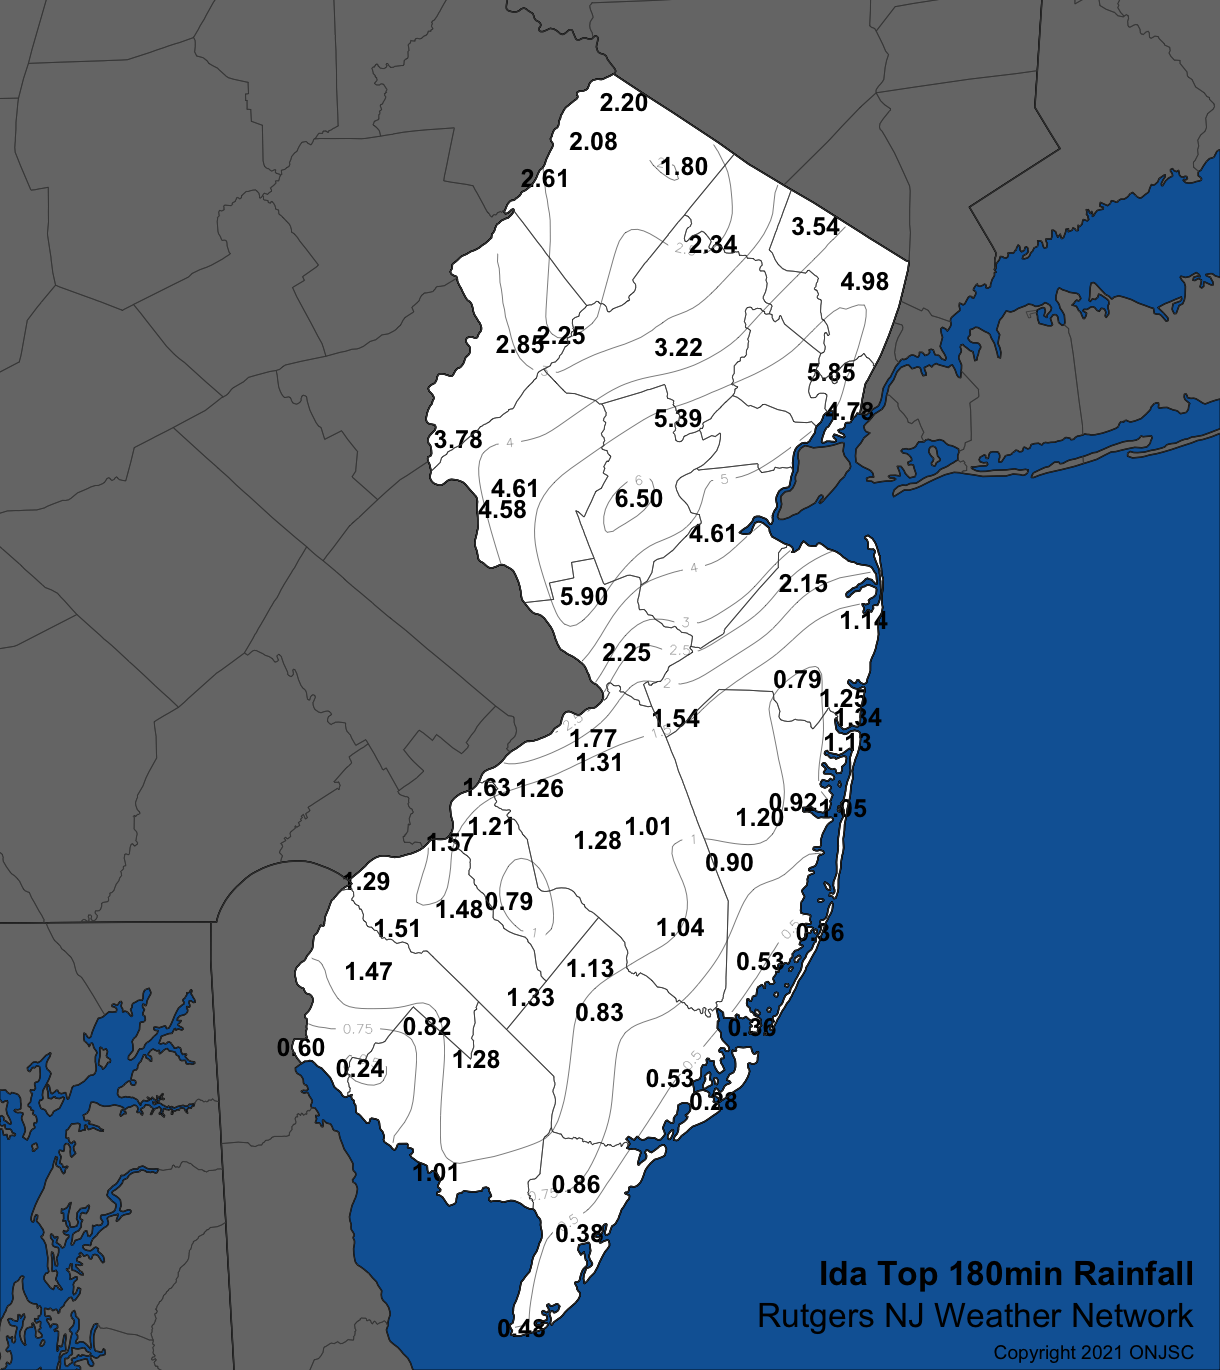 Peak three-hour rainfall across NJ based on observations from Rutgers NJ Weather Network stations and the Newark Airport NWS station.